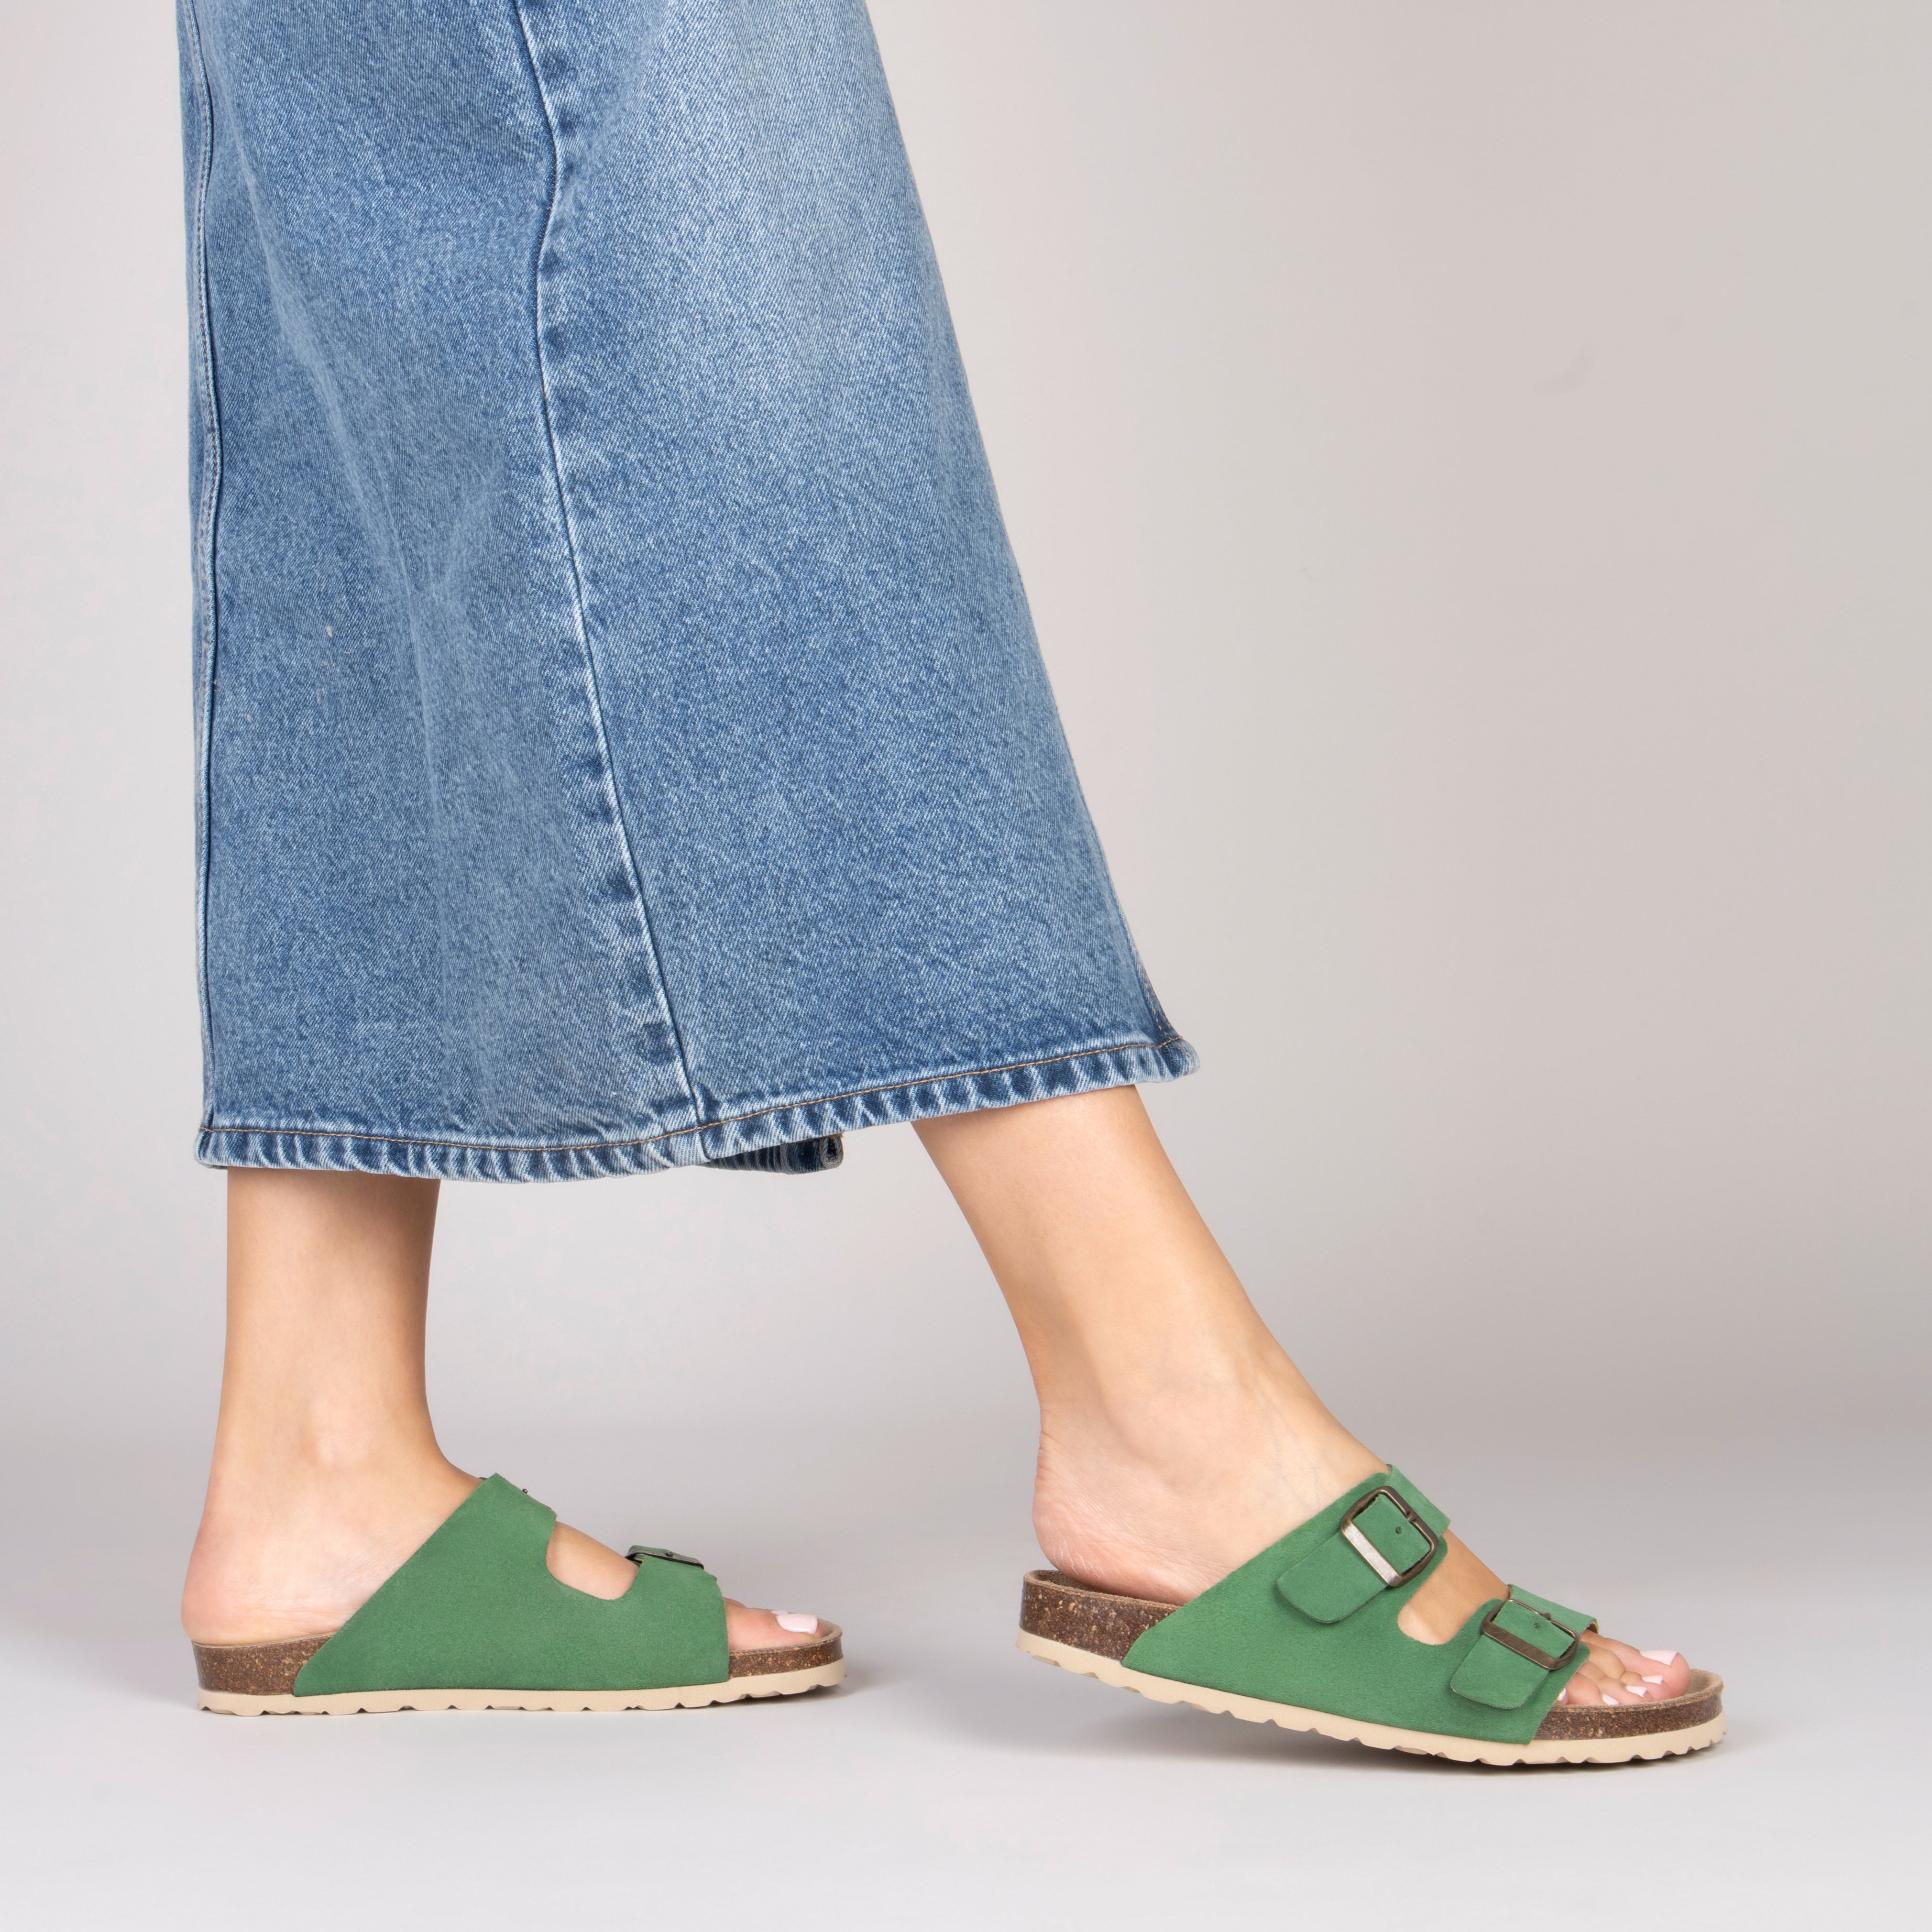 BORA - GREEN Flat sandal with double buckle